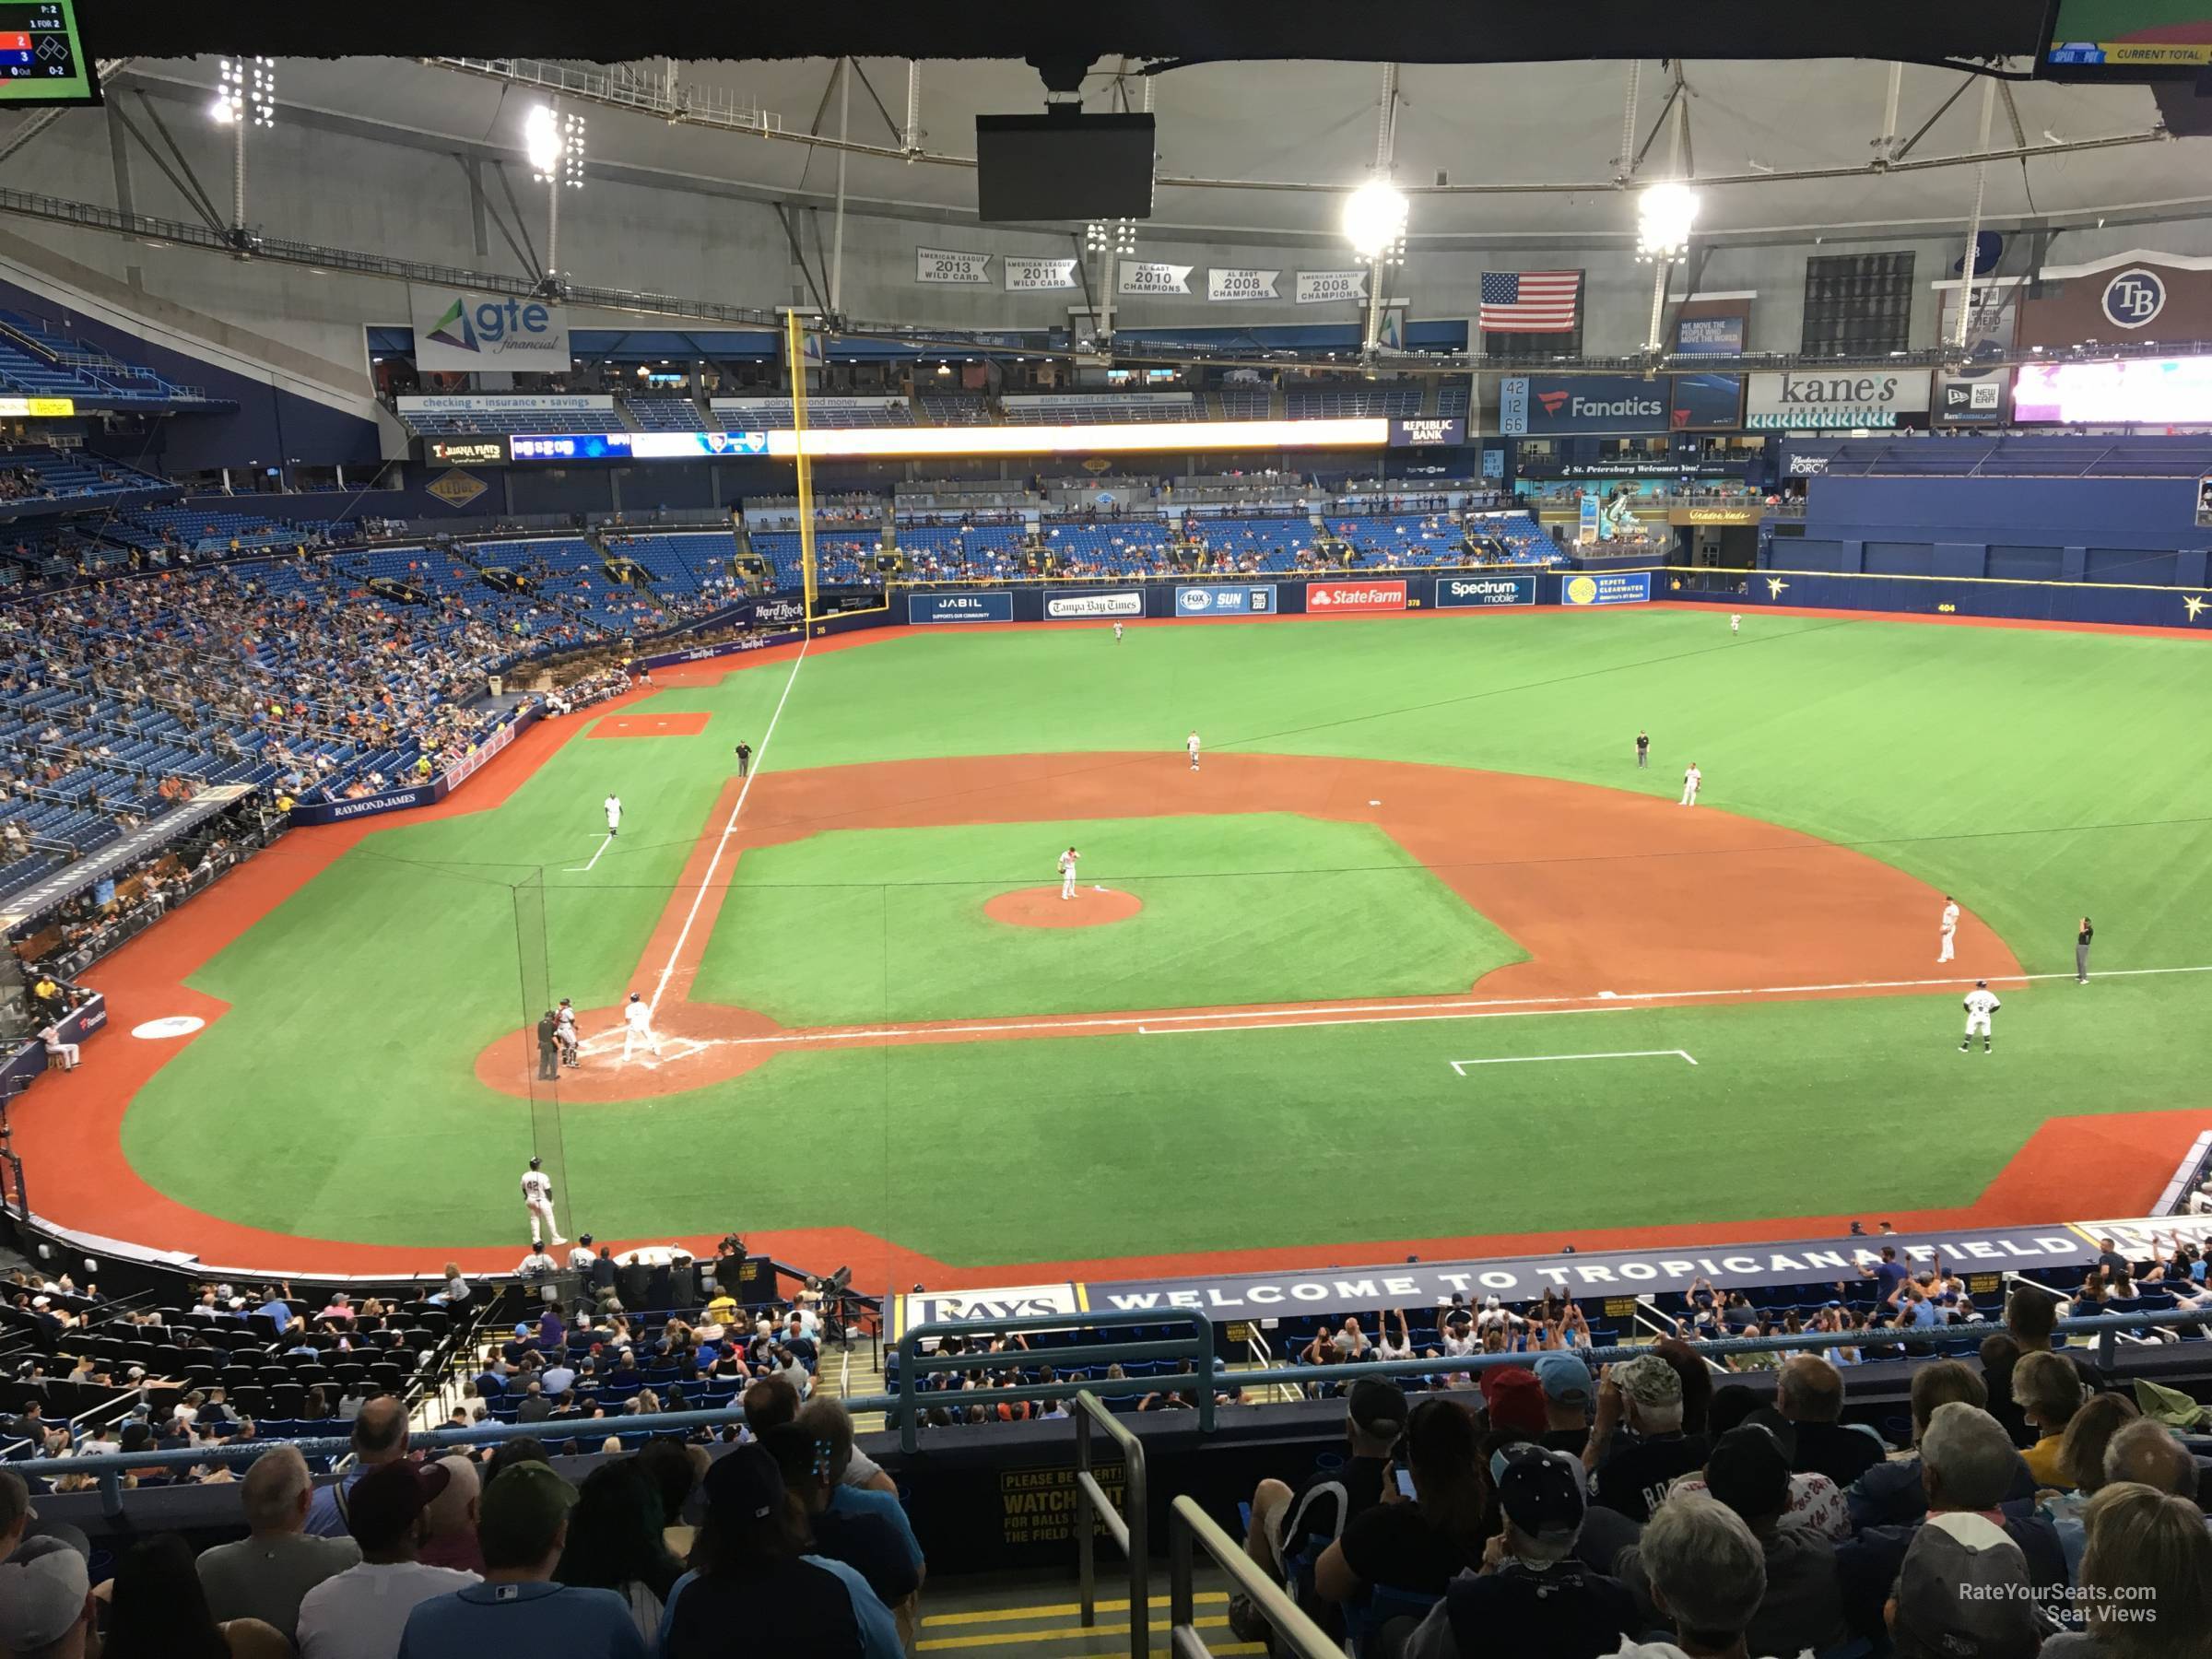 Indoor baseball: A review of Tropicana Field – Section 411